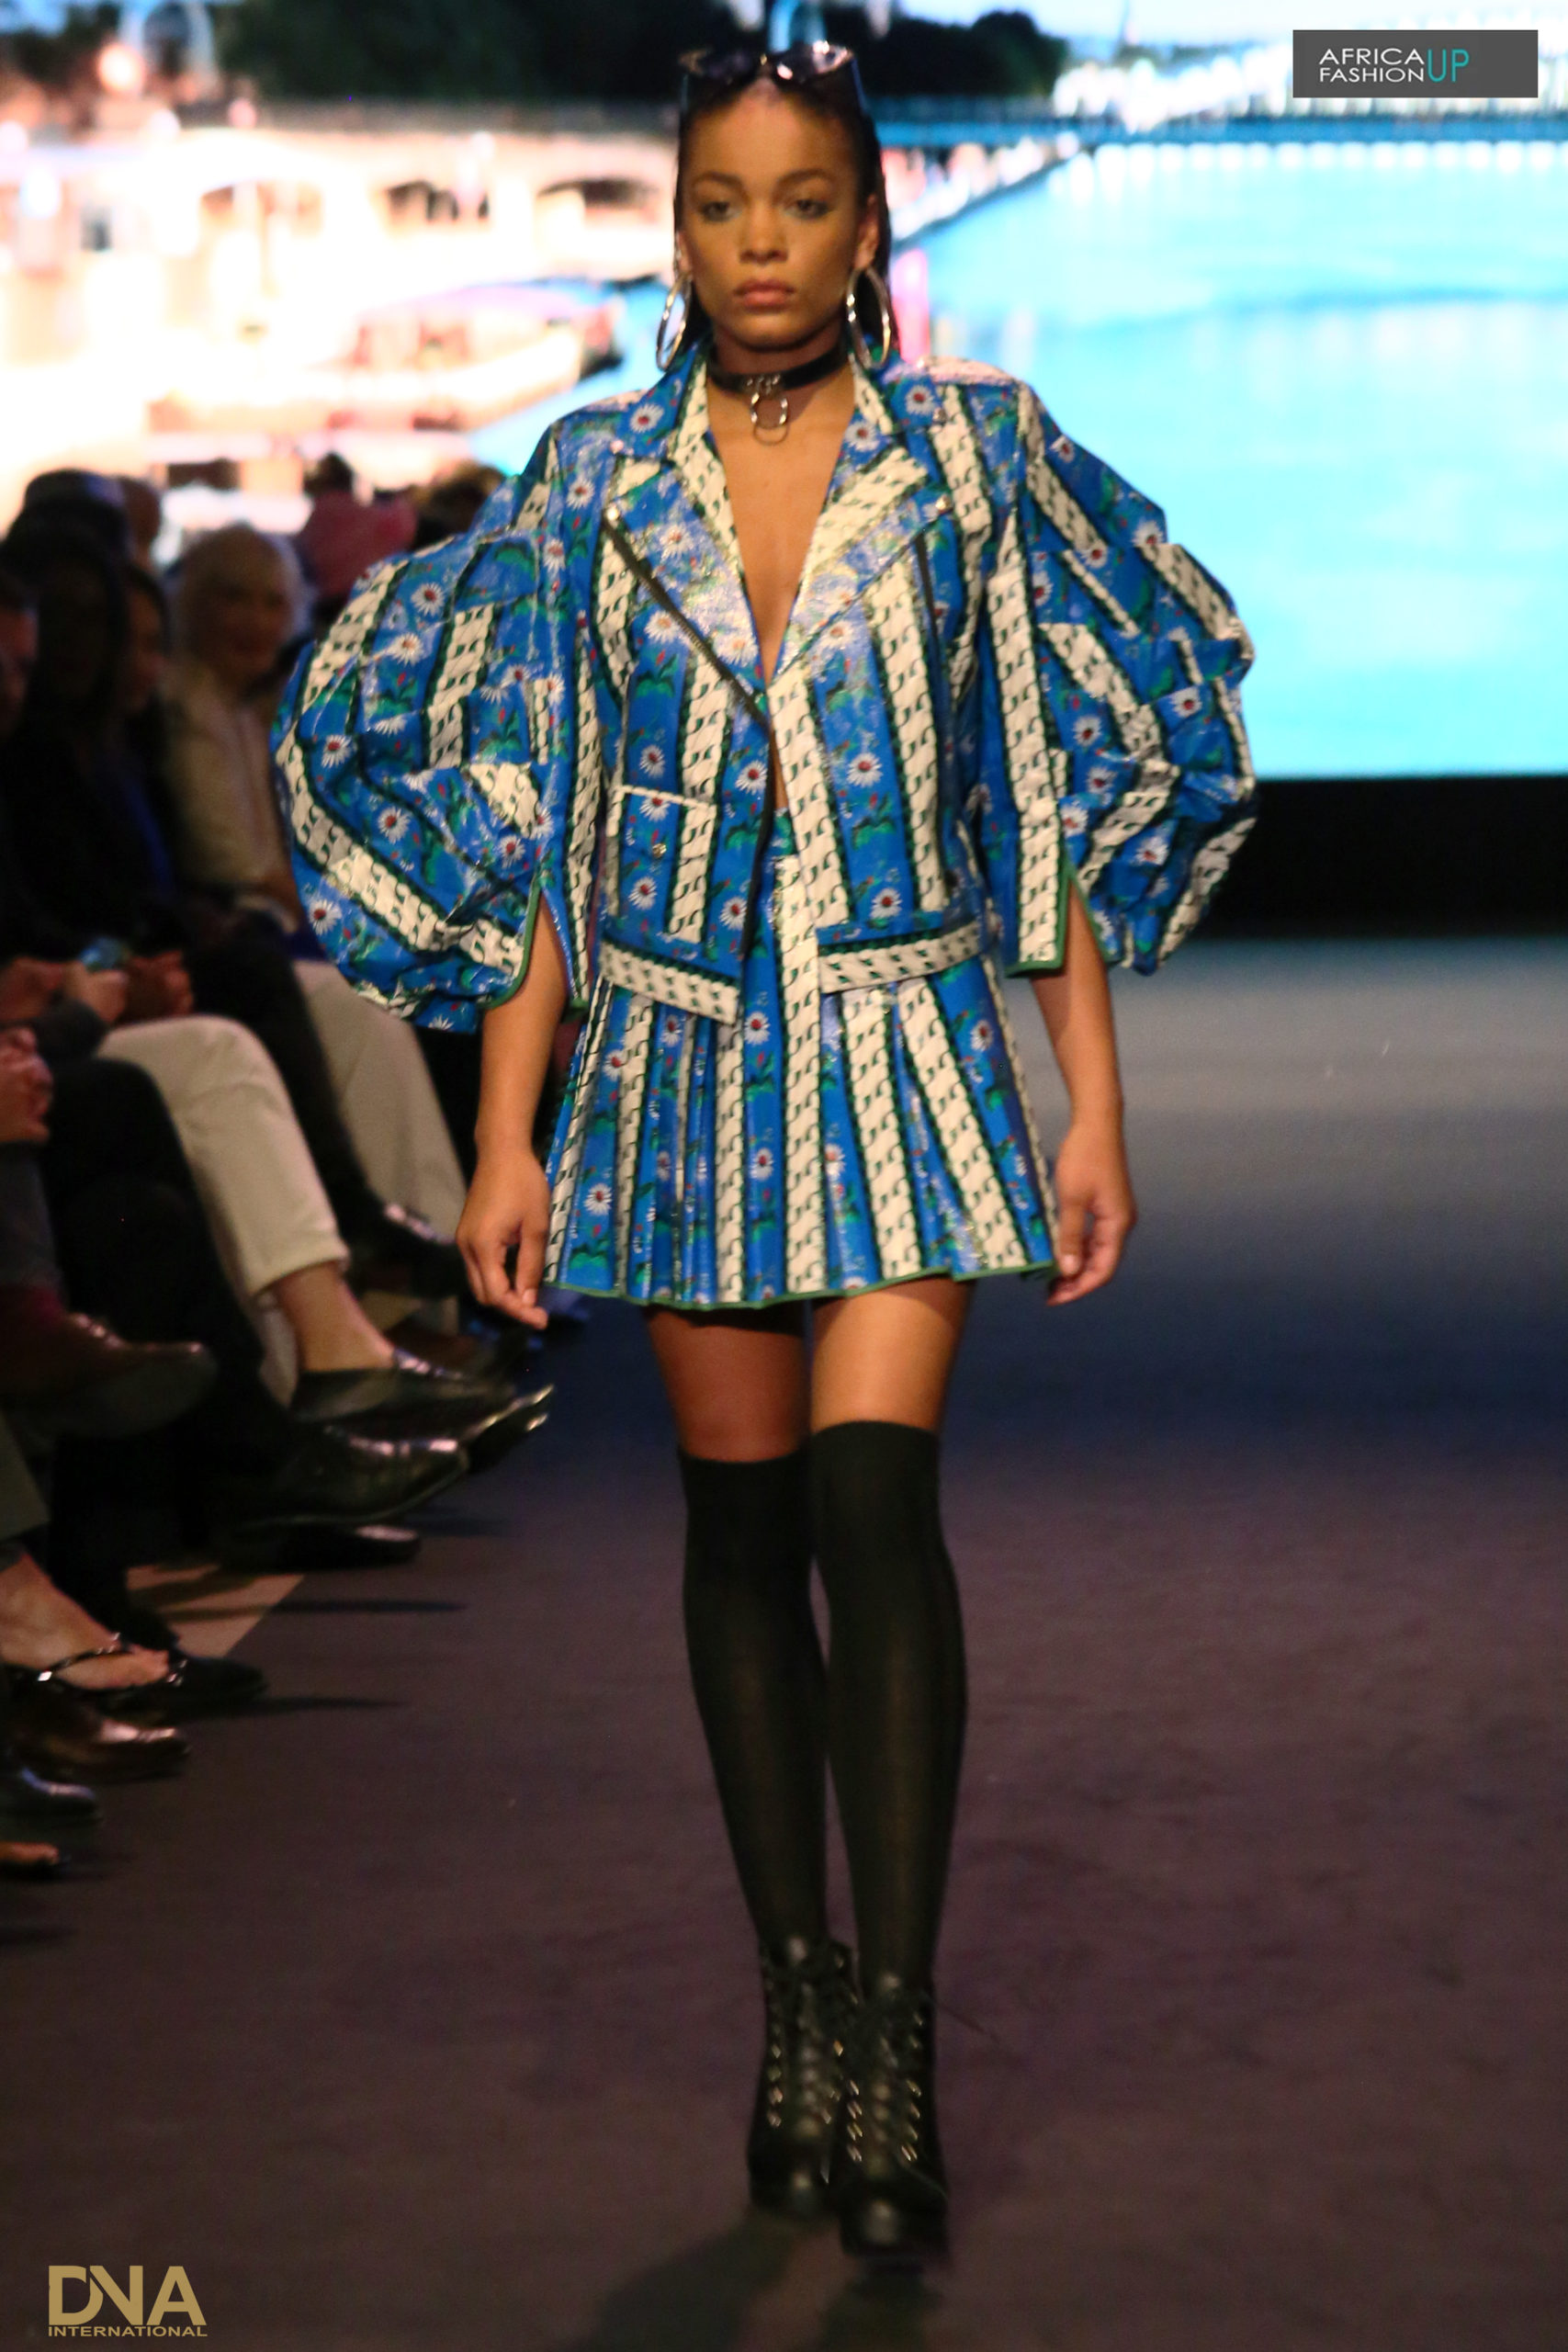 AFRICA-FASHION-UP-JEAN-CEDRIC-SOW-DN-AFRICA-DNA-INTERNATIONAL-MD0A0663